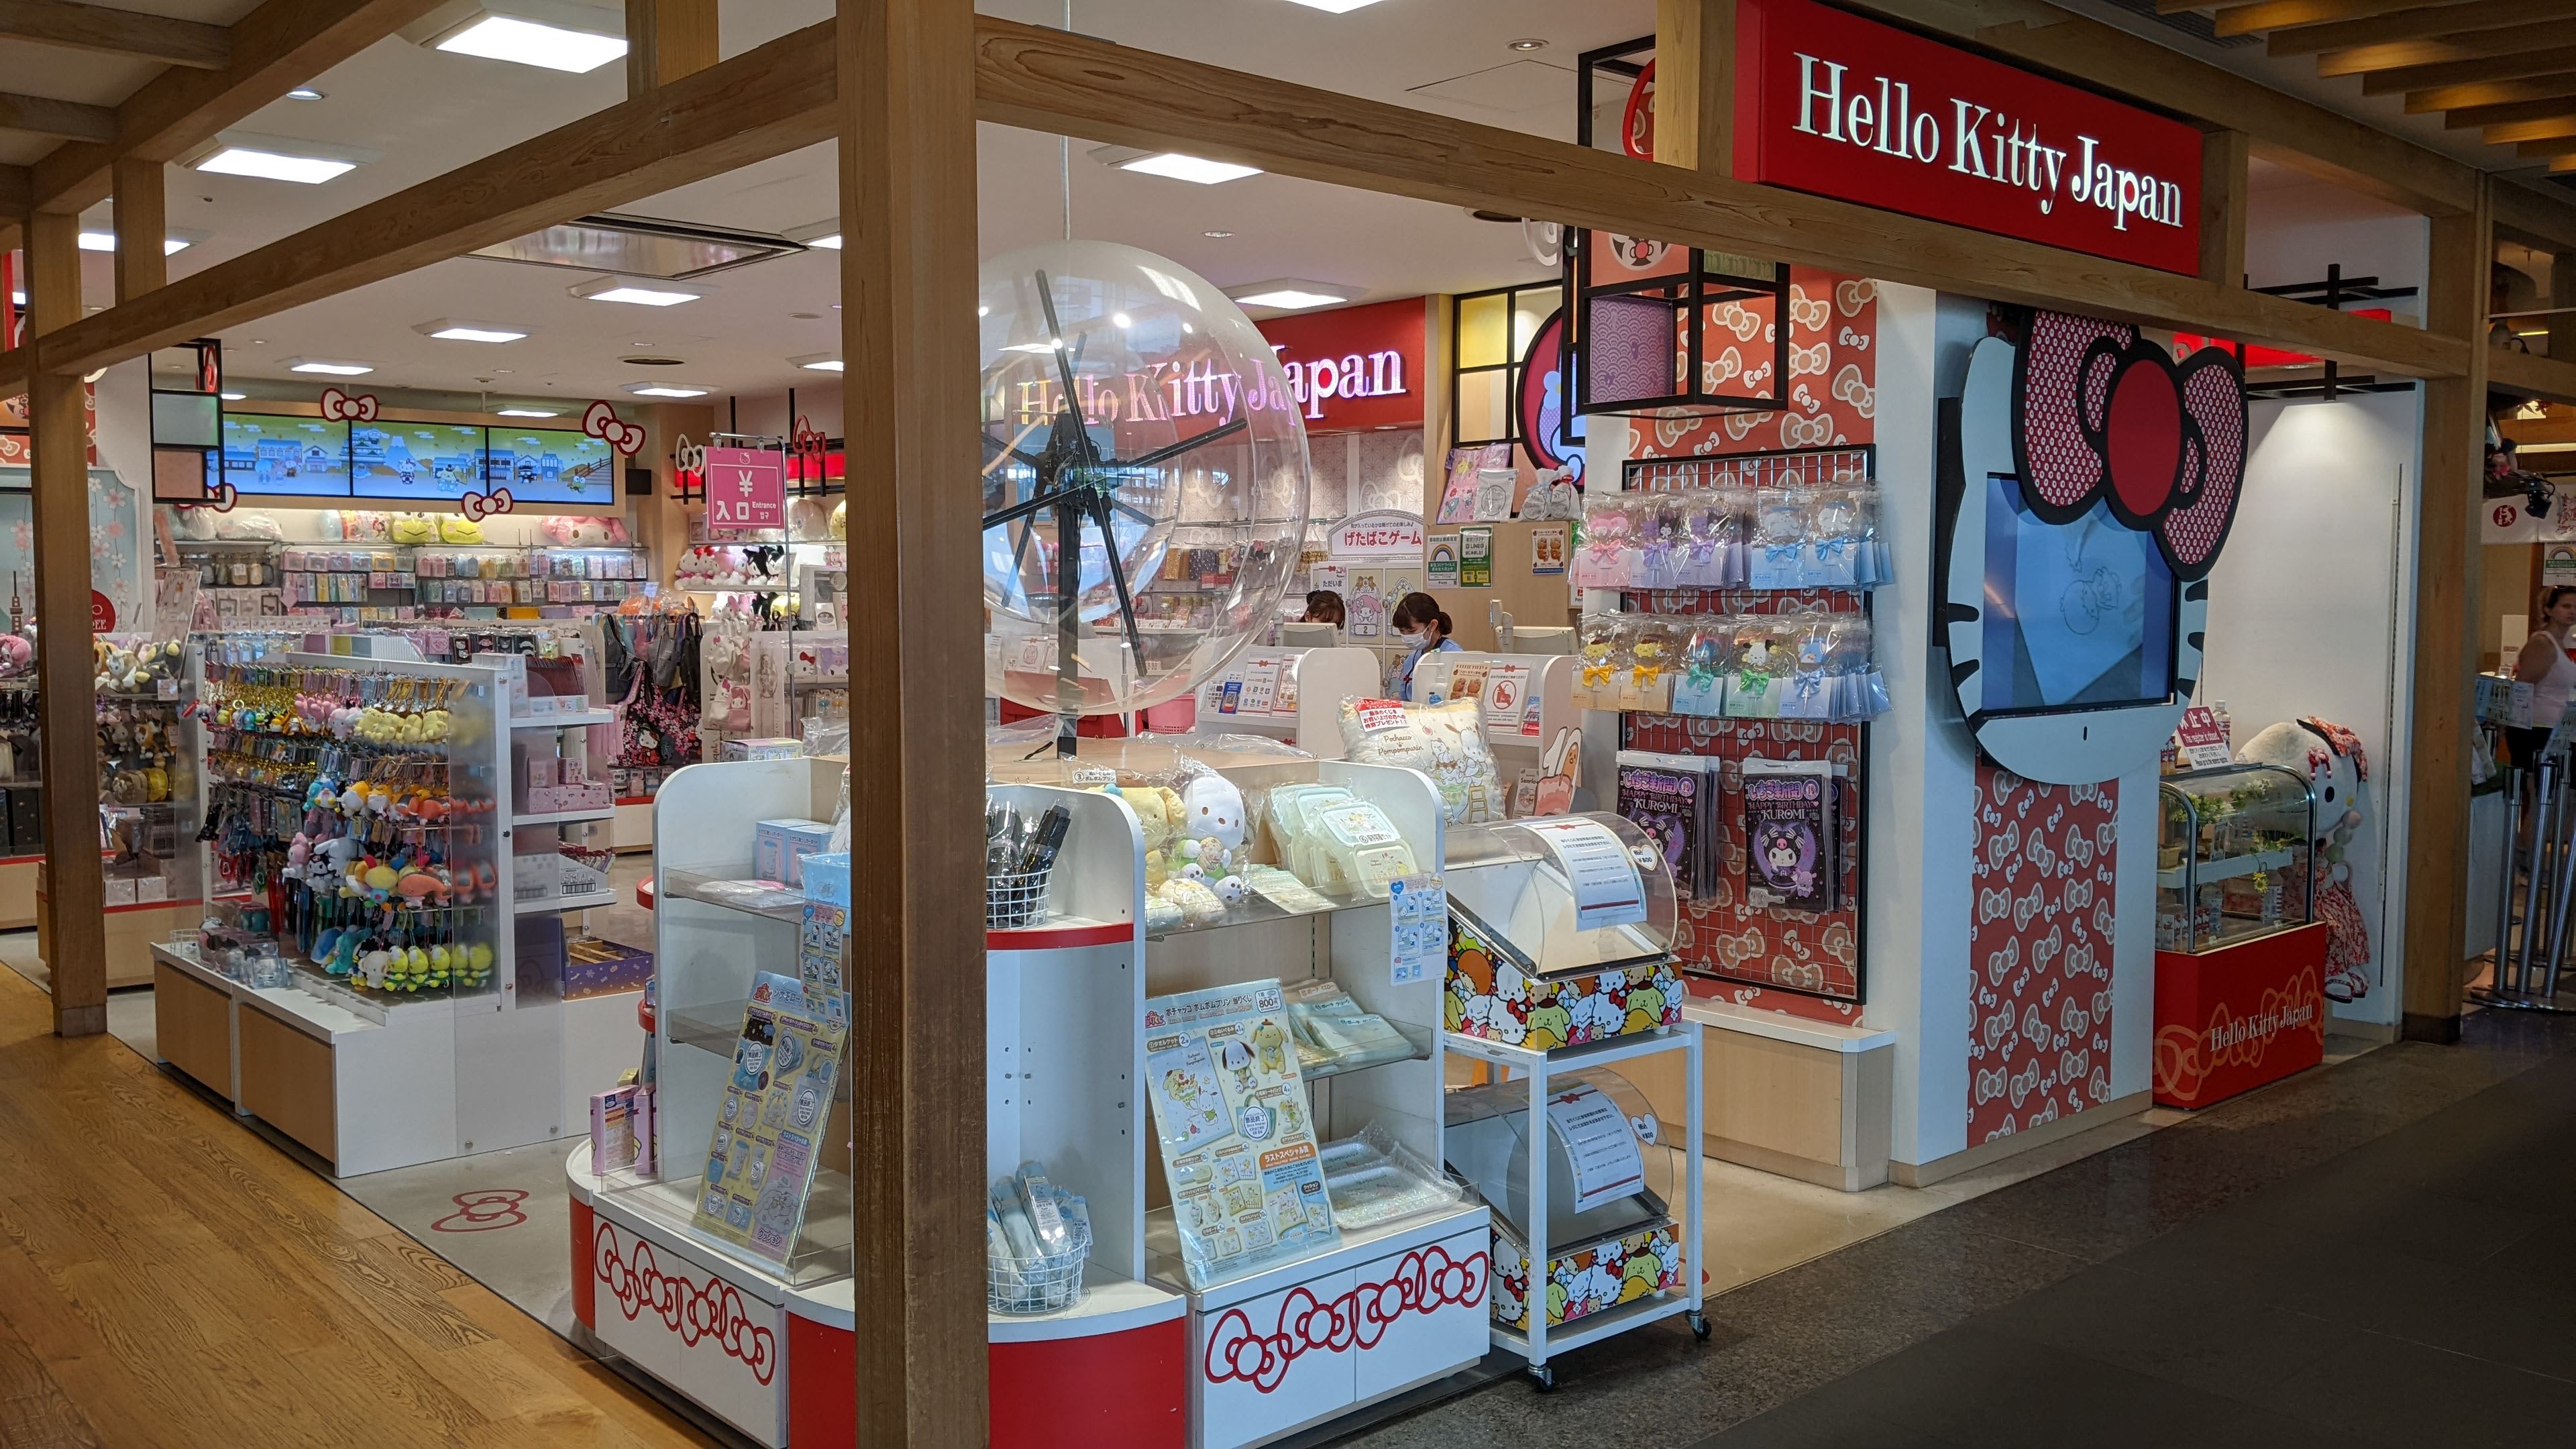 A Hello Kitty Japan store